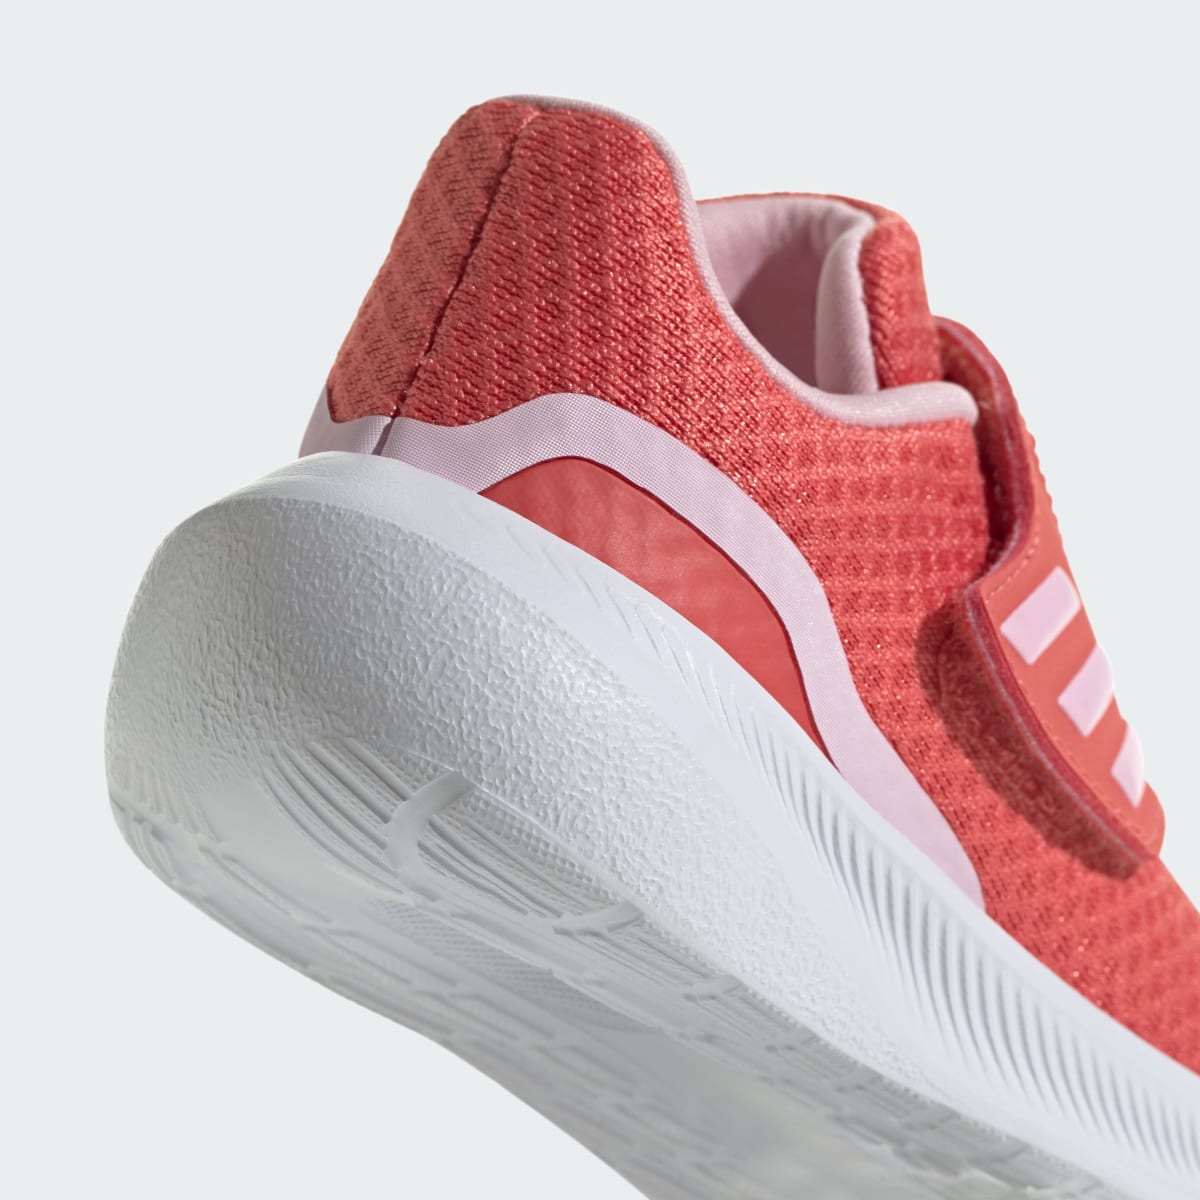 Adidas Runfalcon 3.0 Sport Running Hook-and-Loop Shoes. 10